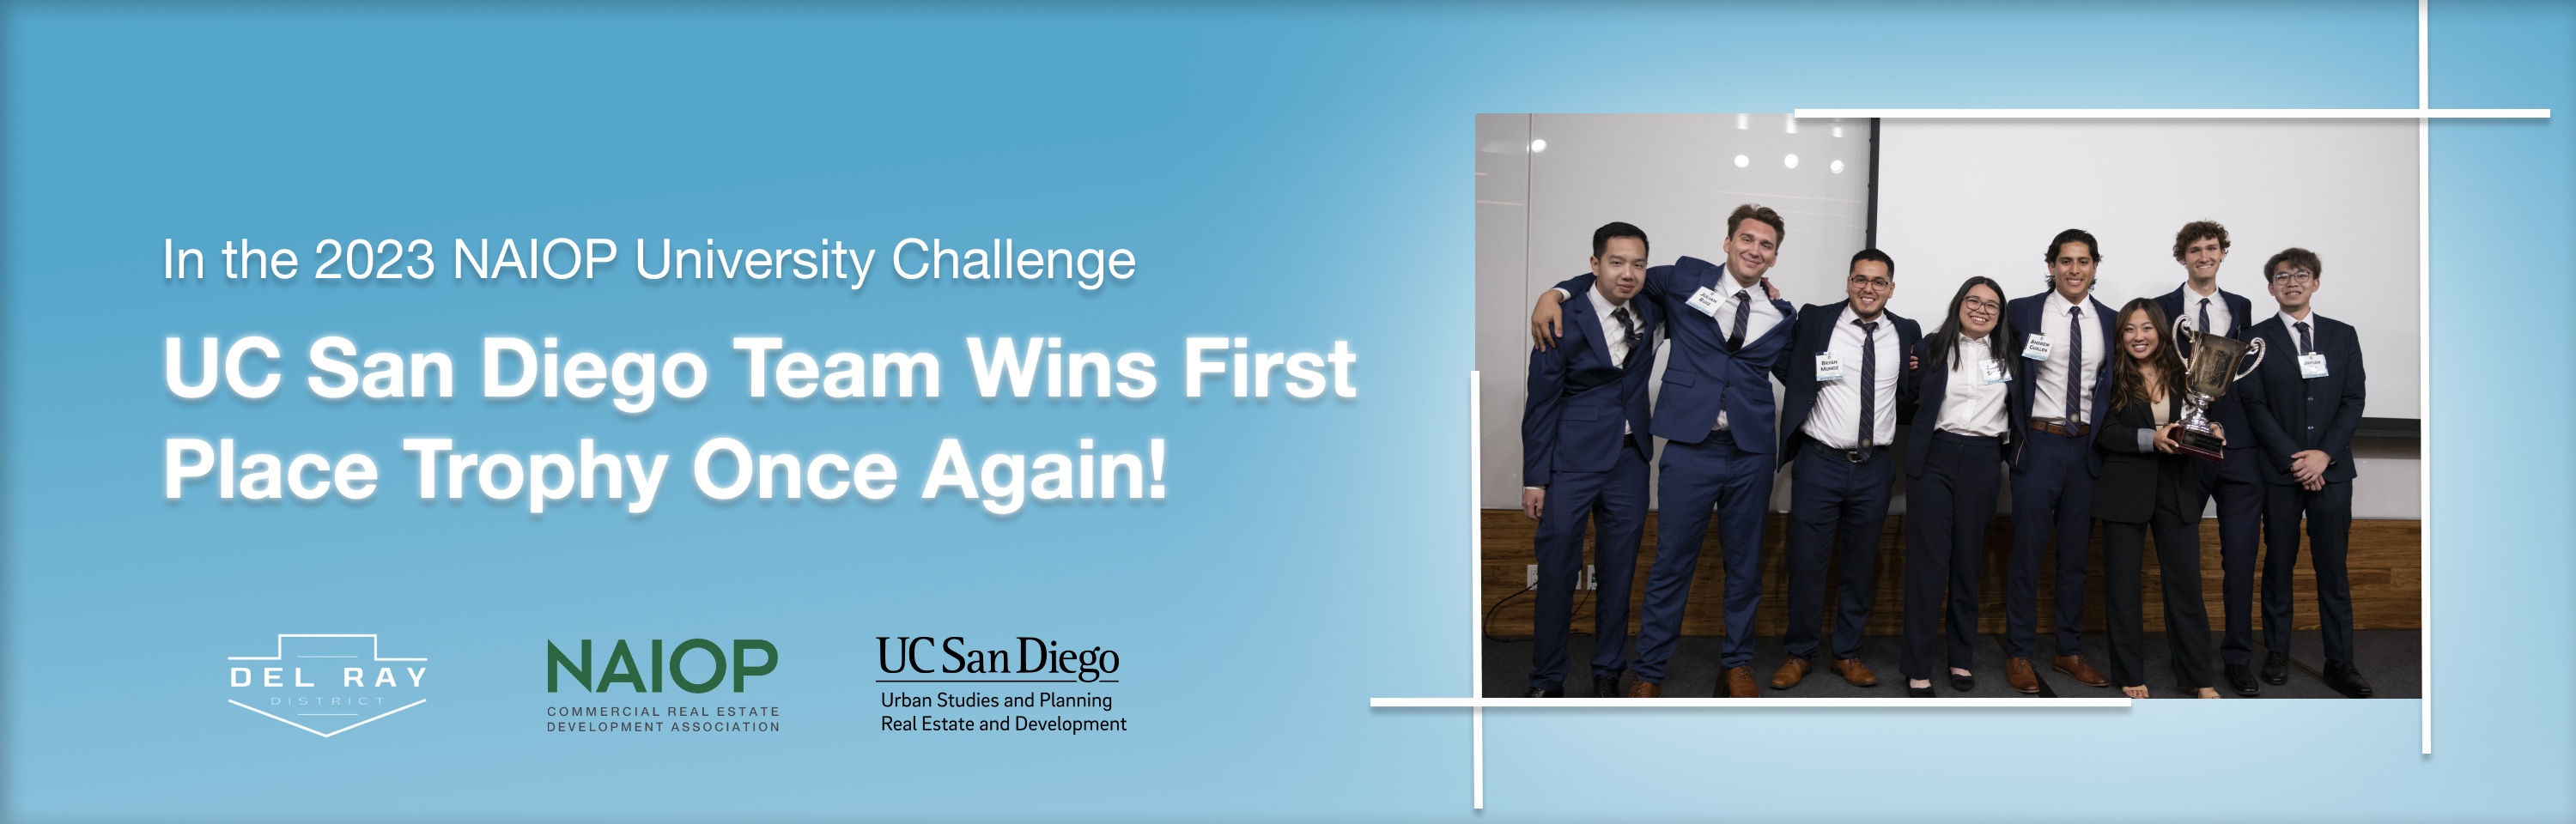 UCSD team wins the 2023 NAIOP University Challenge once again!